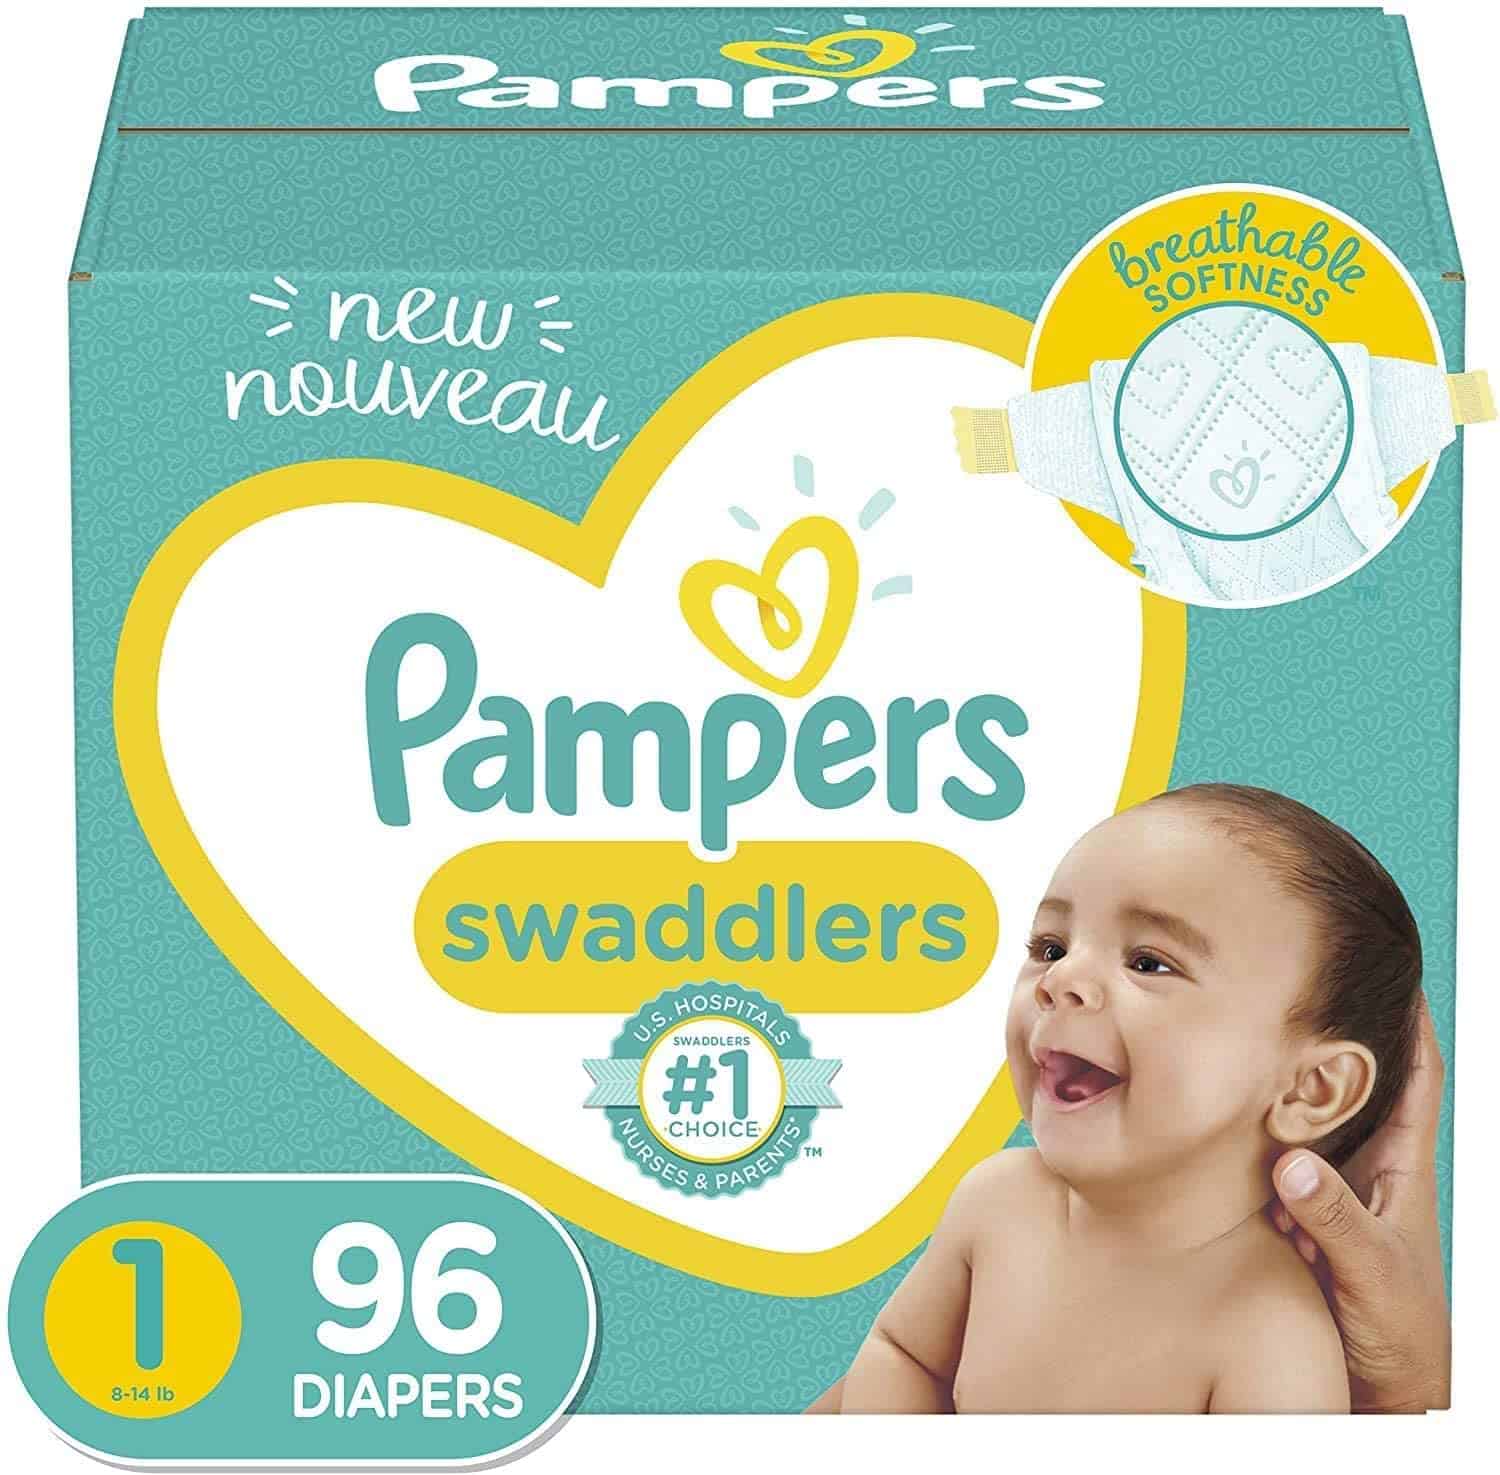 Pampers Swaddlers Disposable Diapers, Super Pack